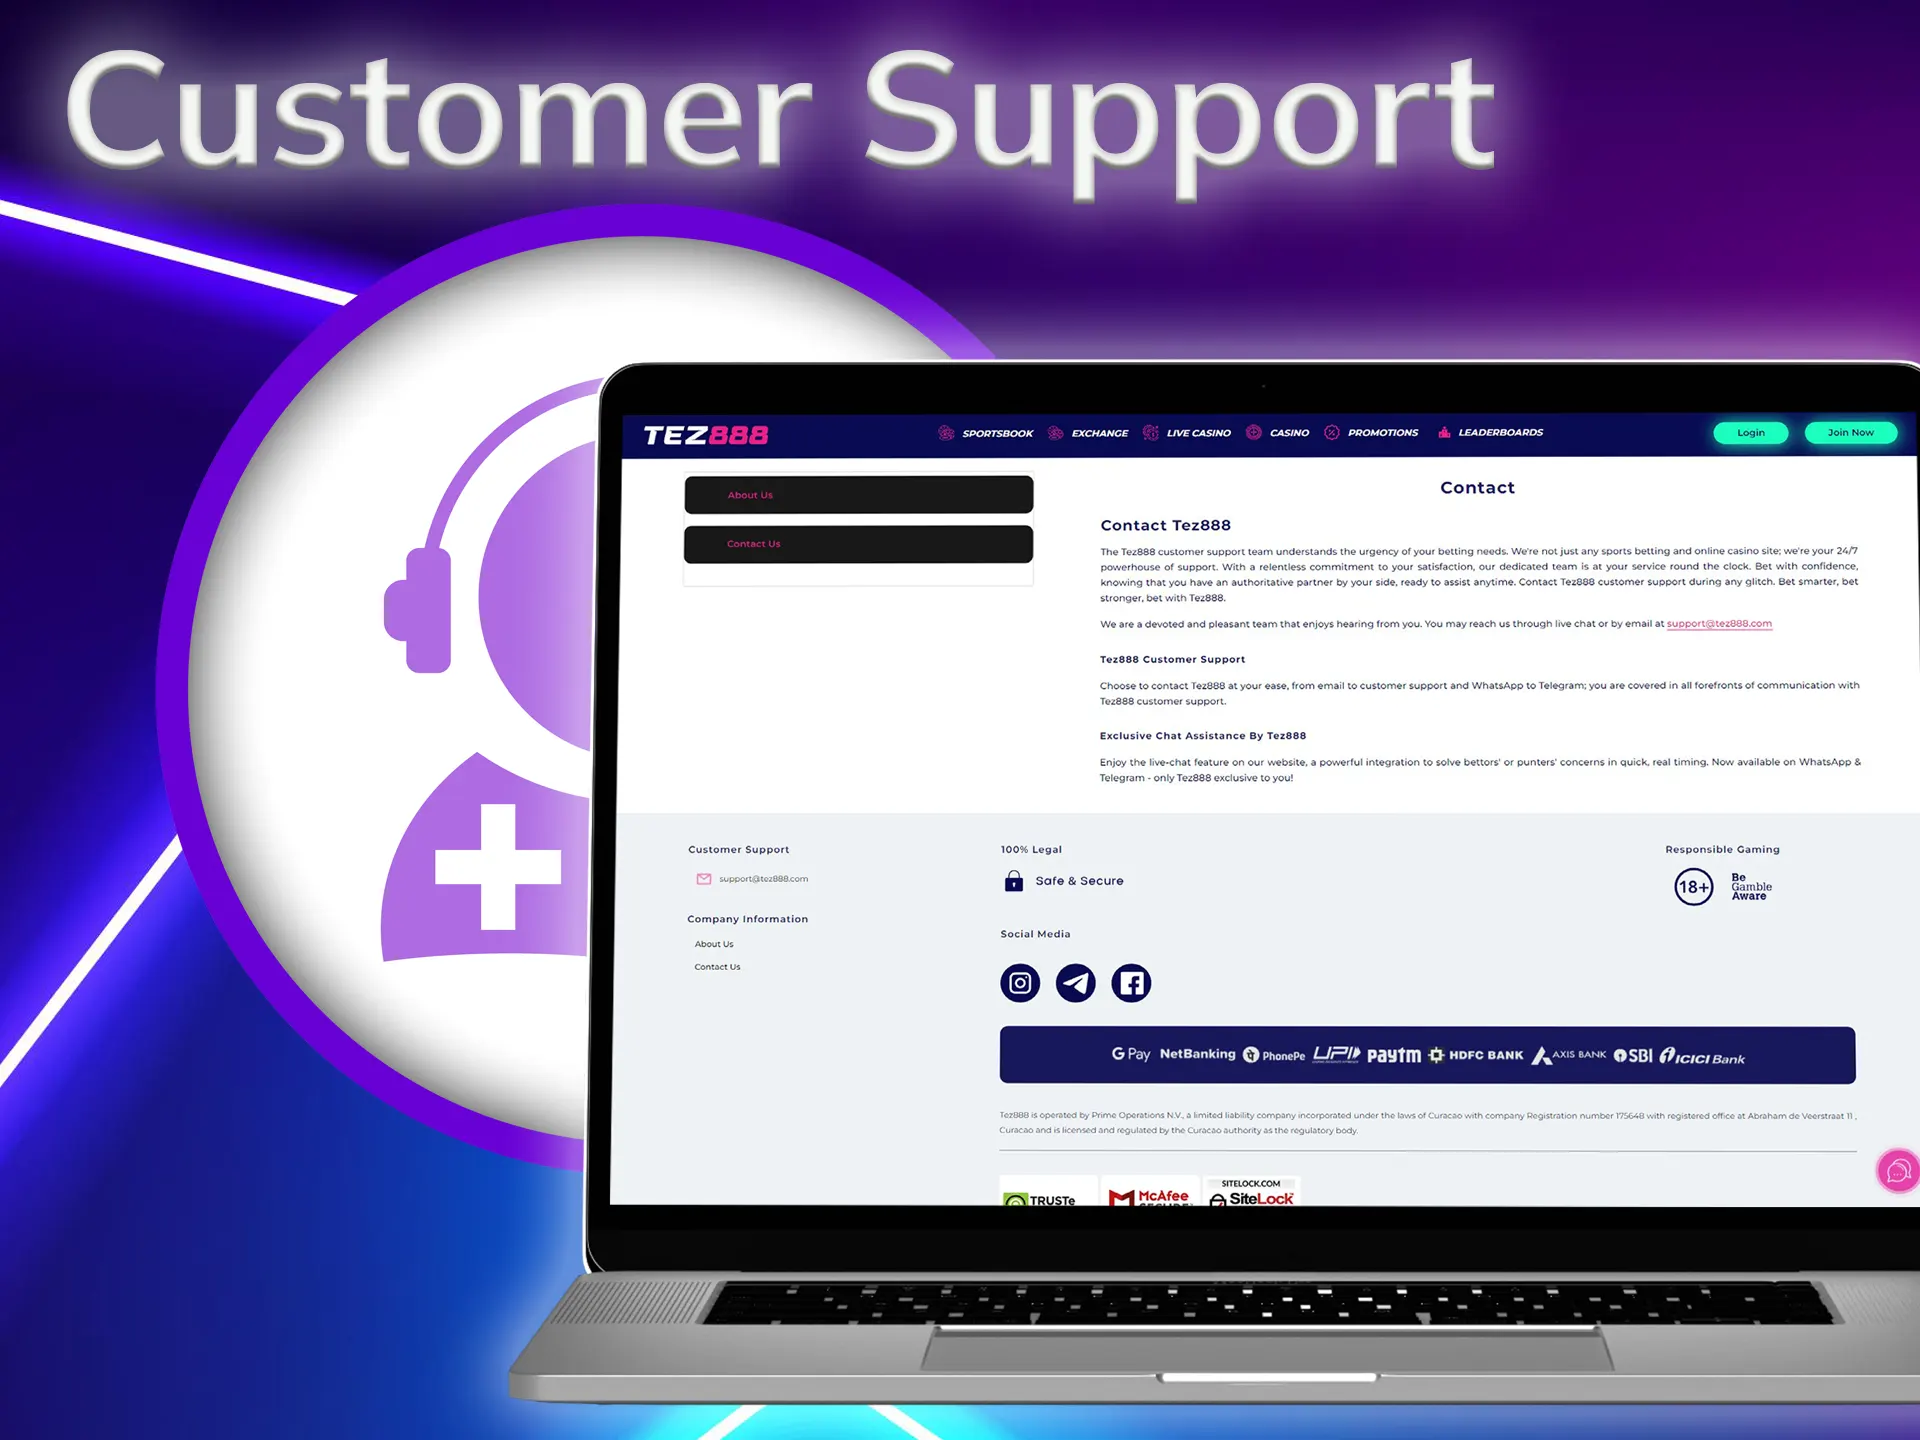 You can always contact tez888 customer support.